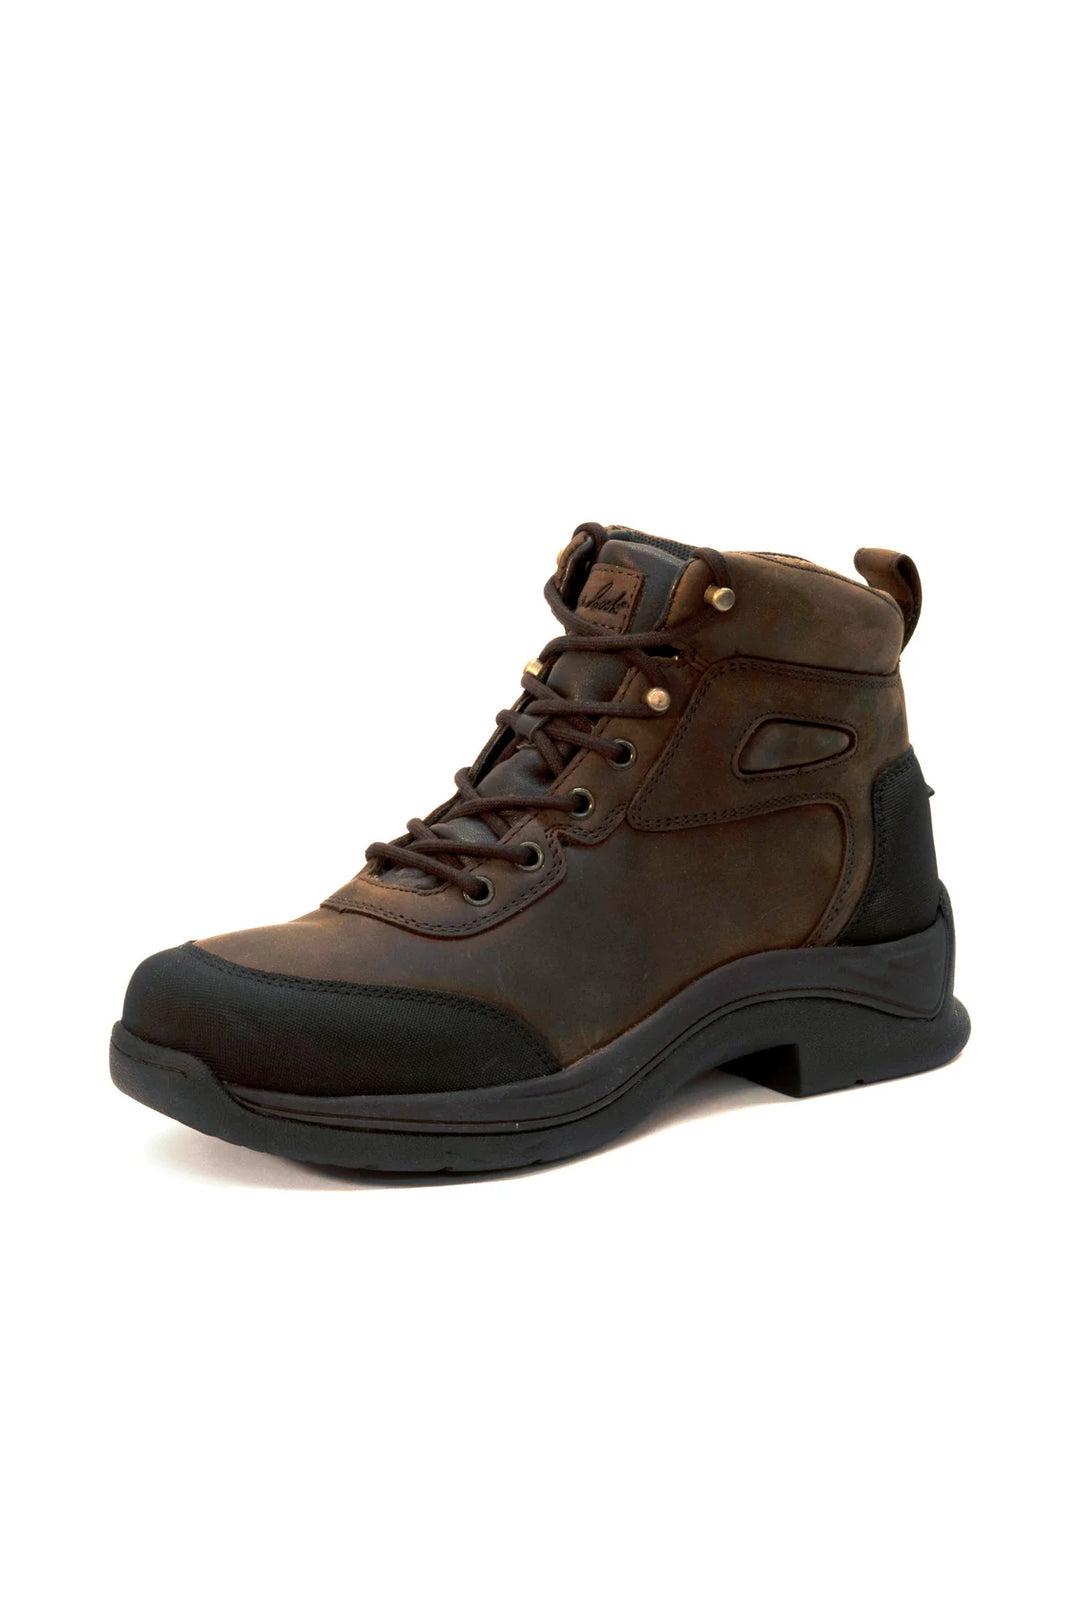 Thomas Cook - Mens Arkaba Lace Up Boots